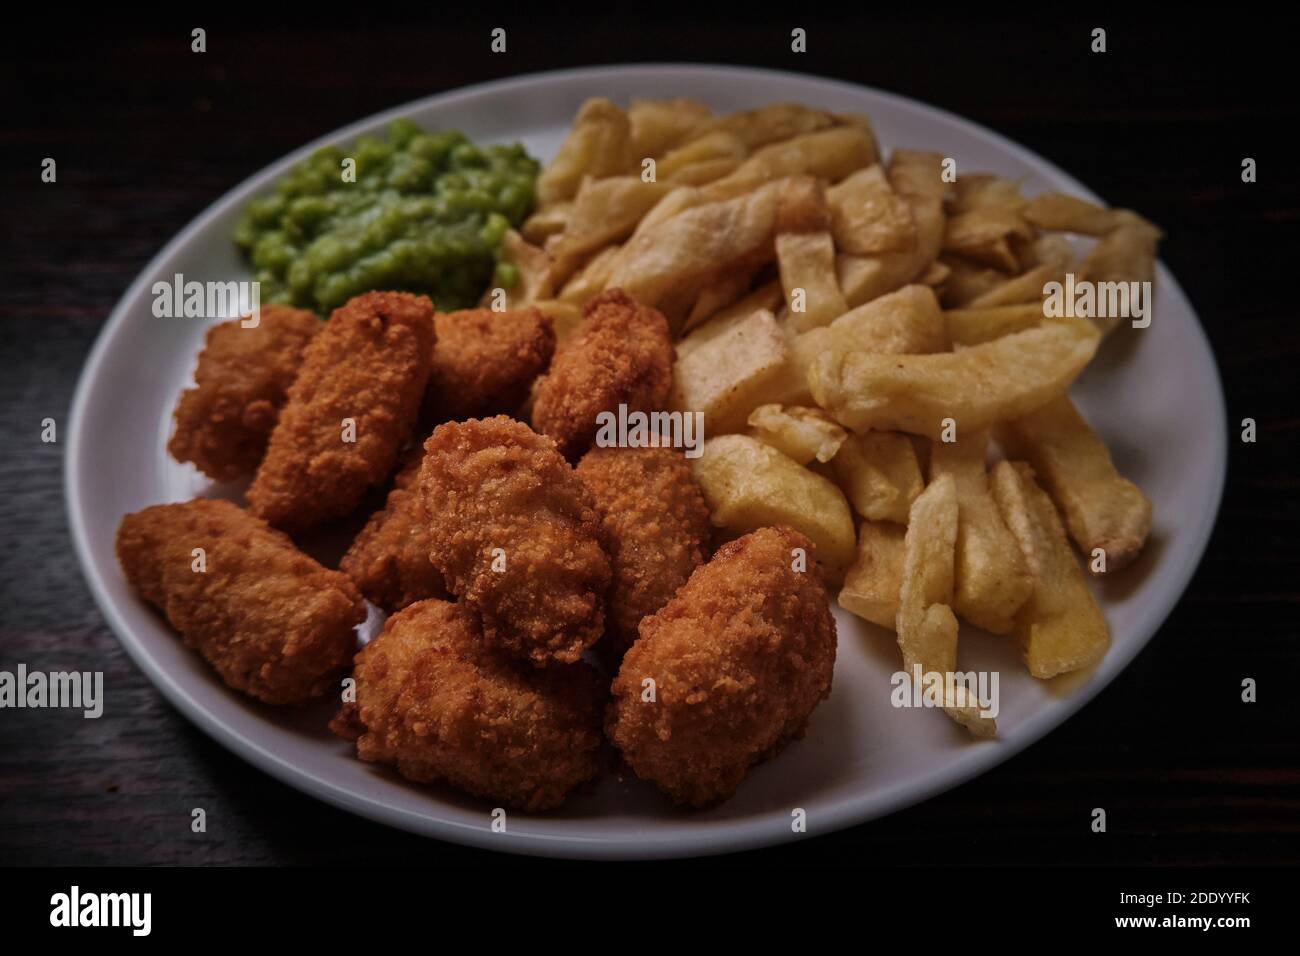 Scampi, chips and mushy peas, British classic fish and chips restaurant ...